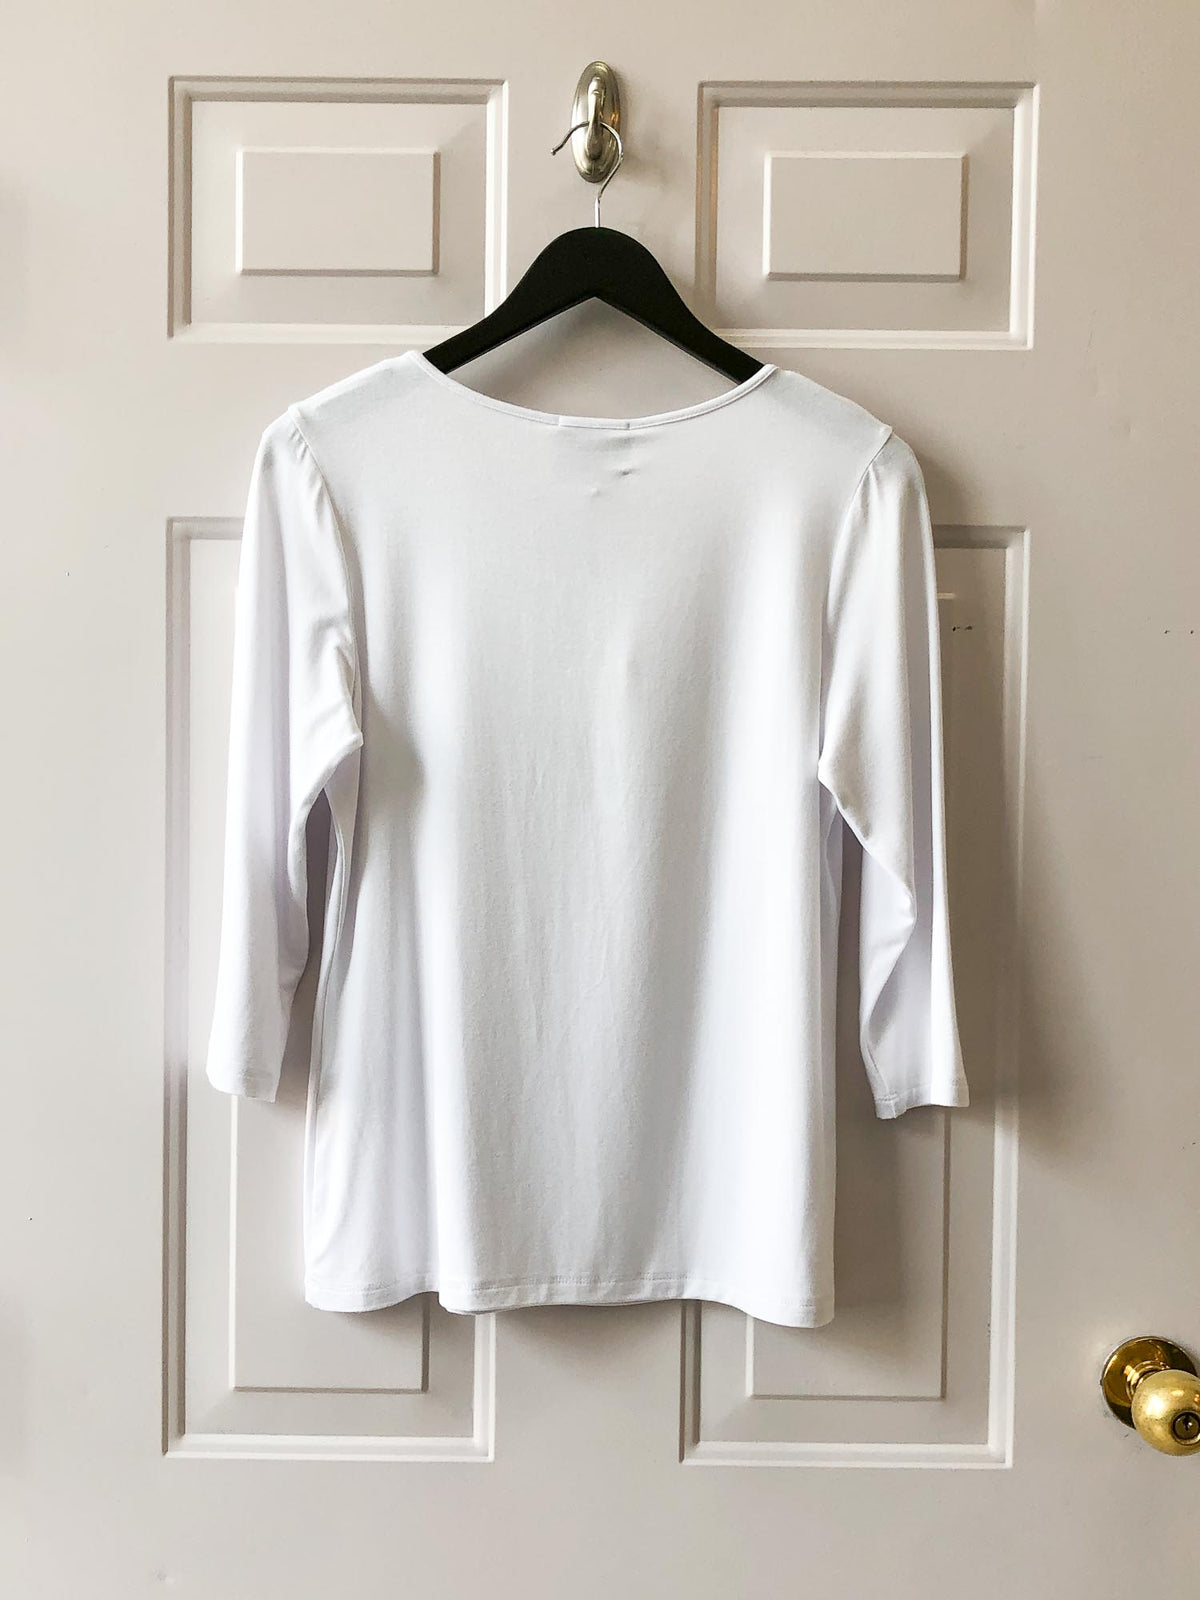 Chalet et ceci Jersey 3/4 Sleeve Basic Top, White